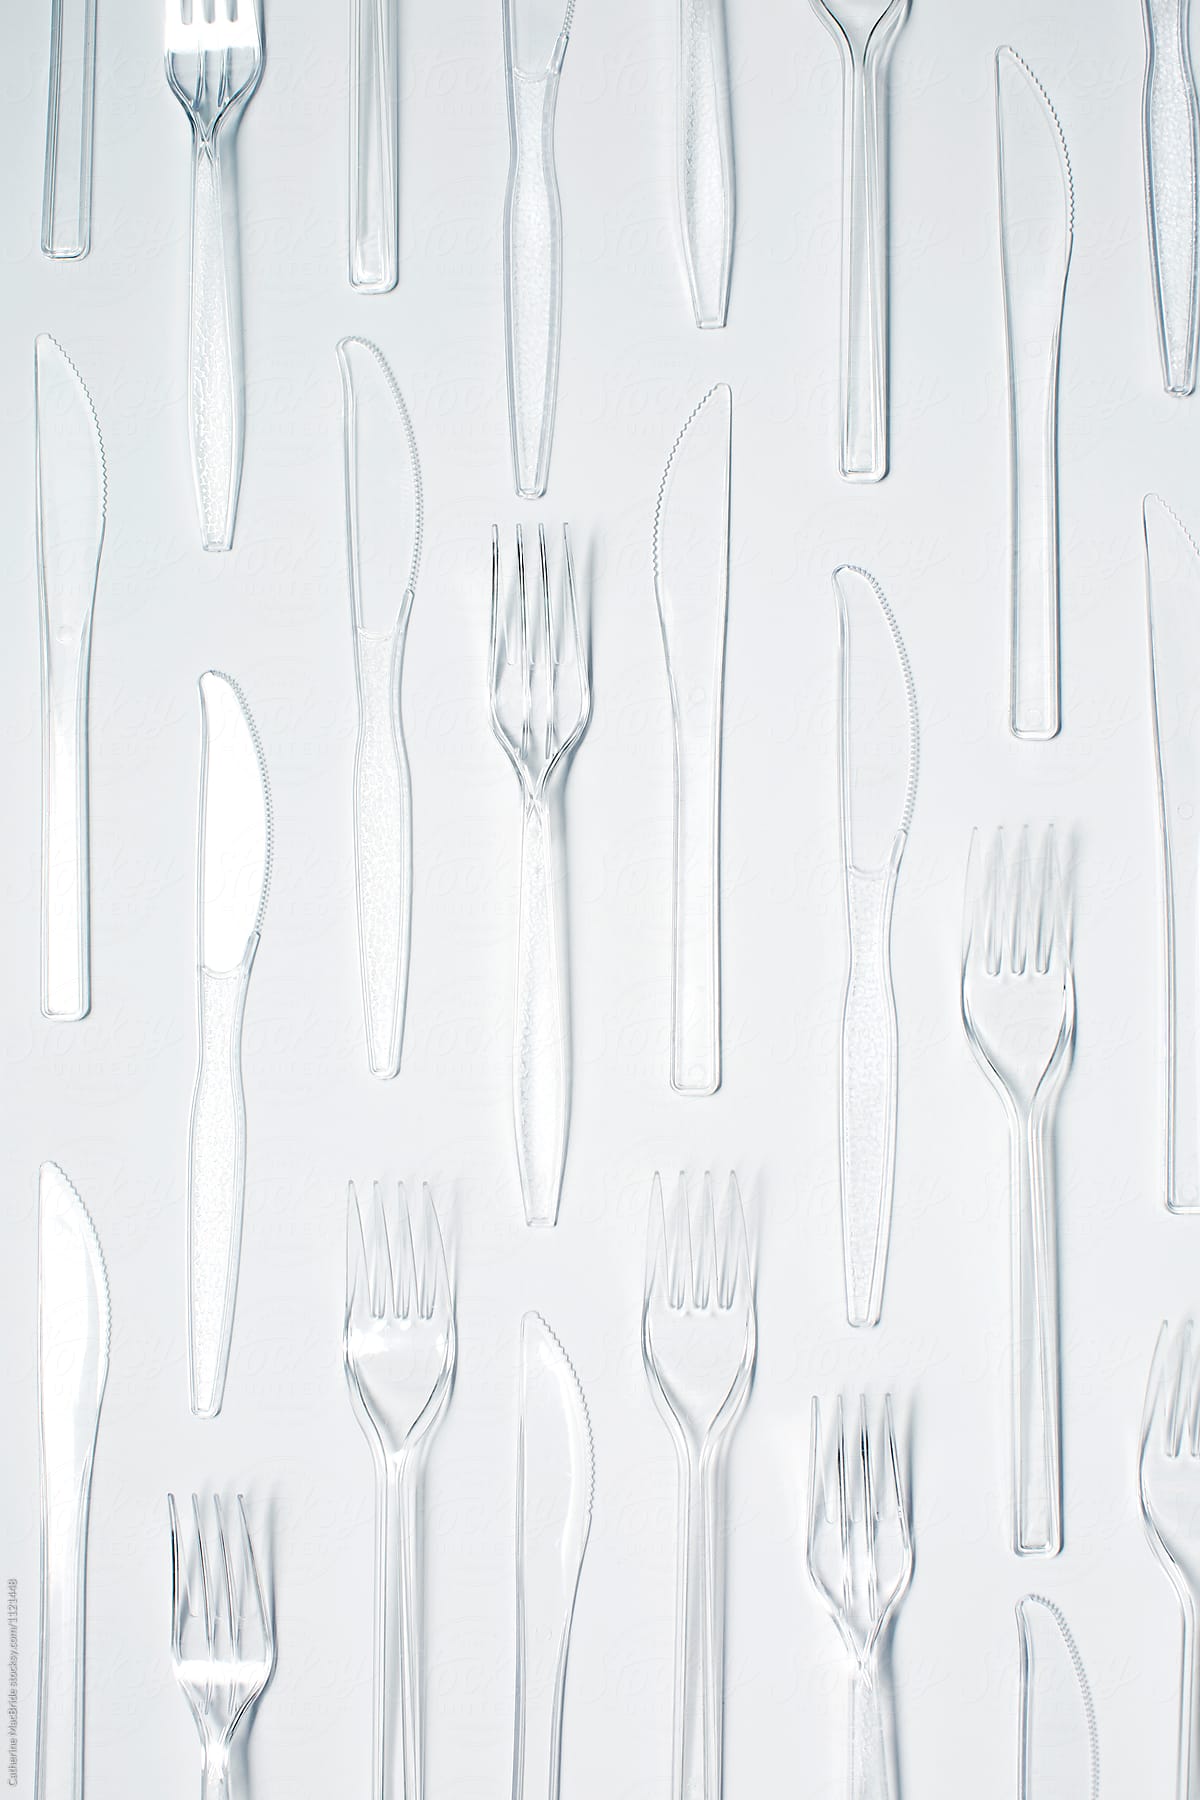 Rows of Plastic cutlery